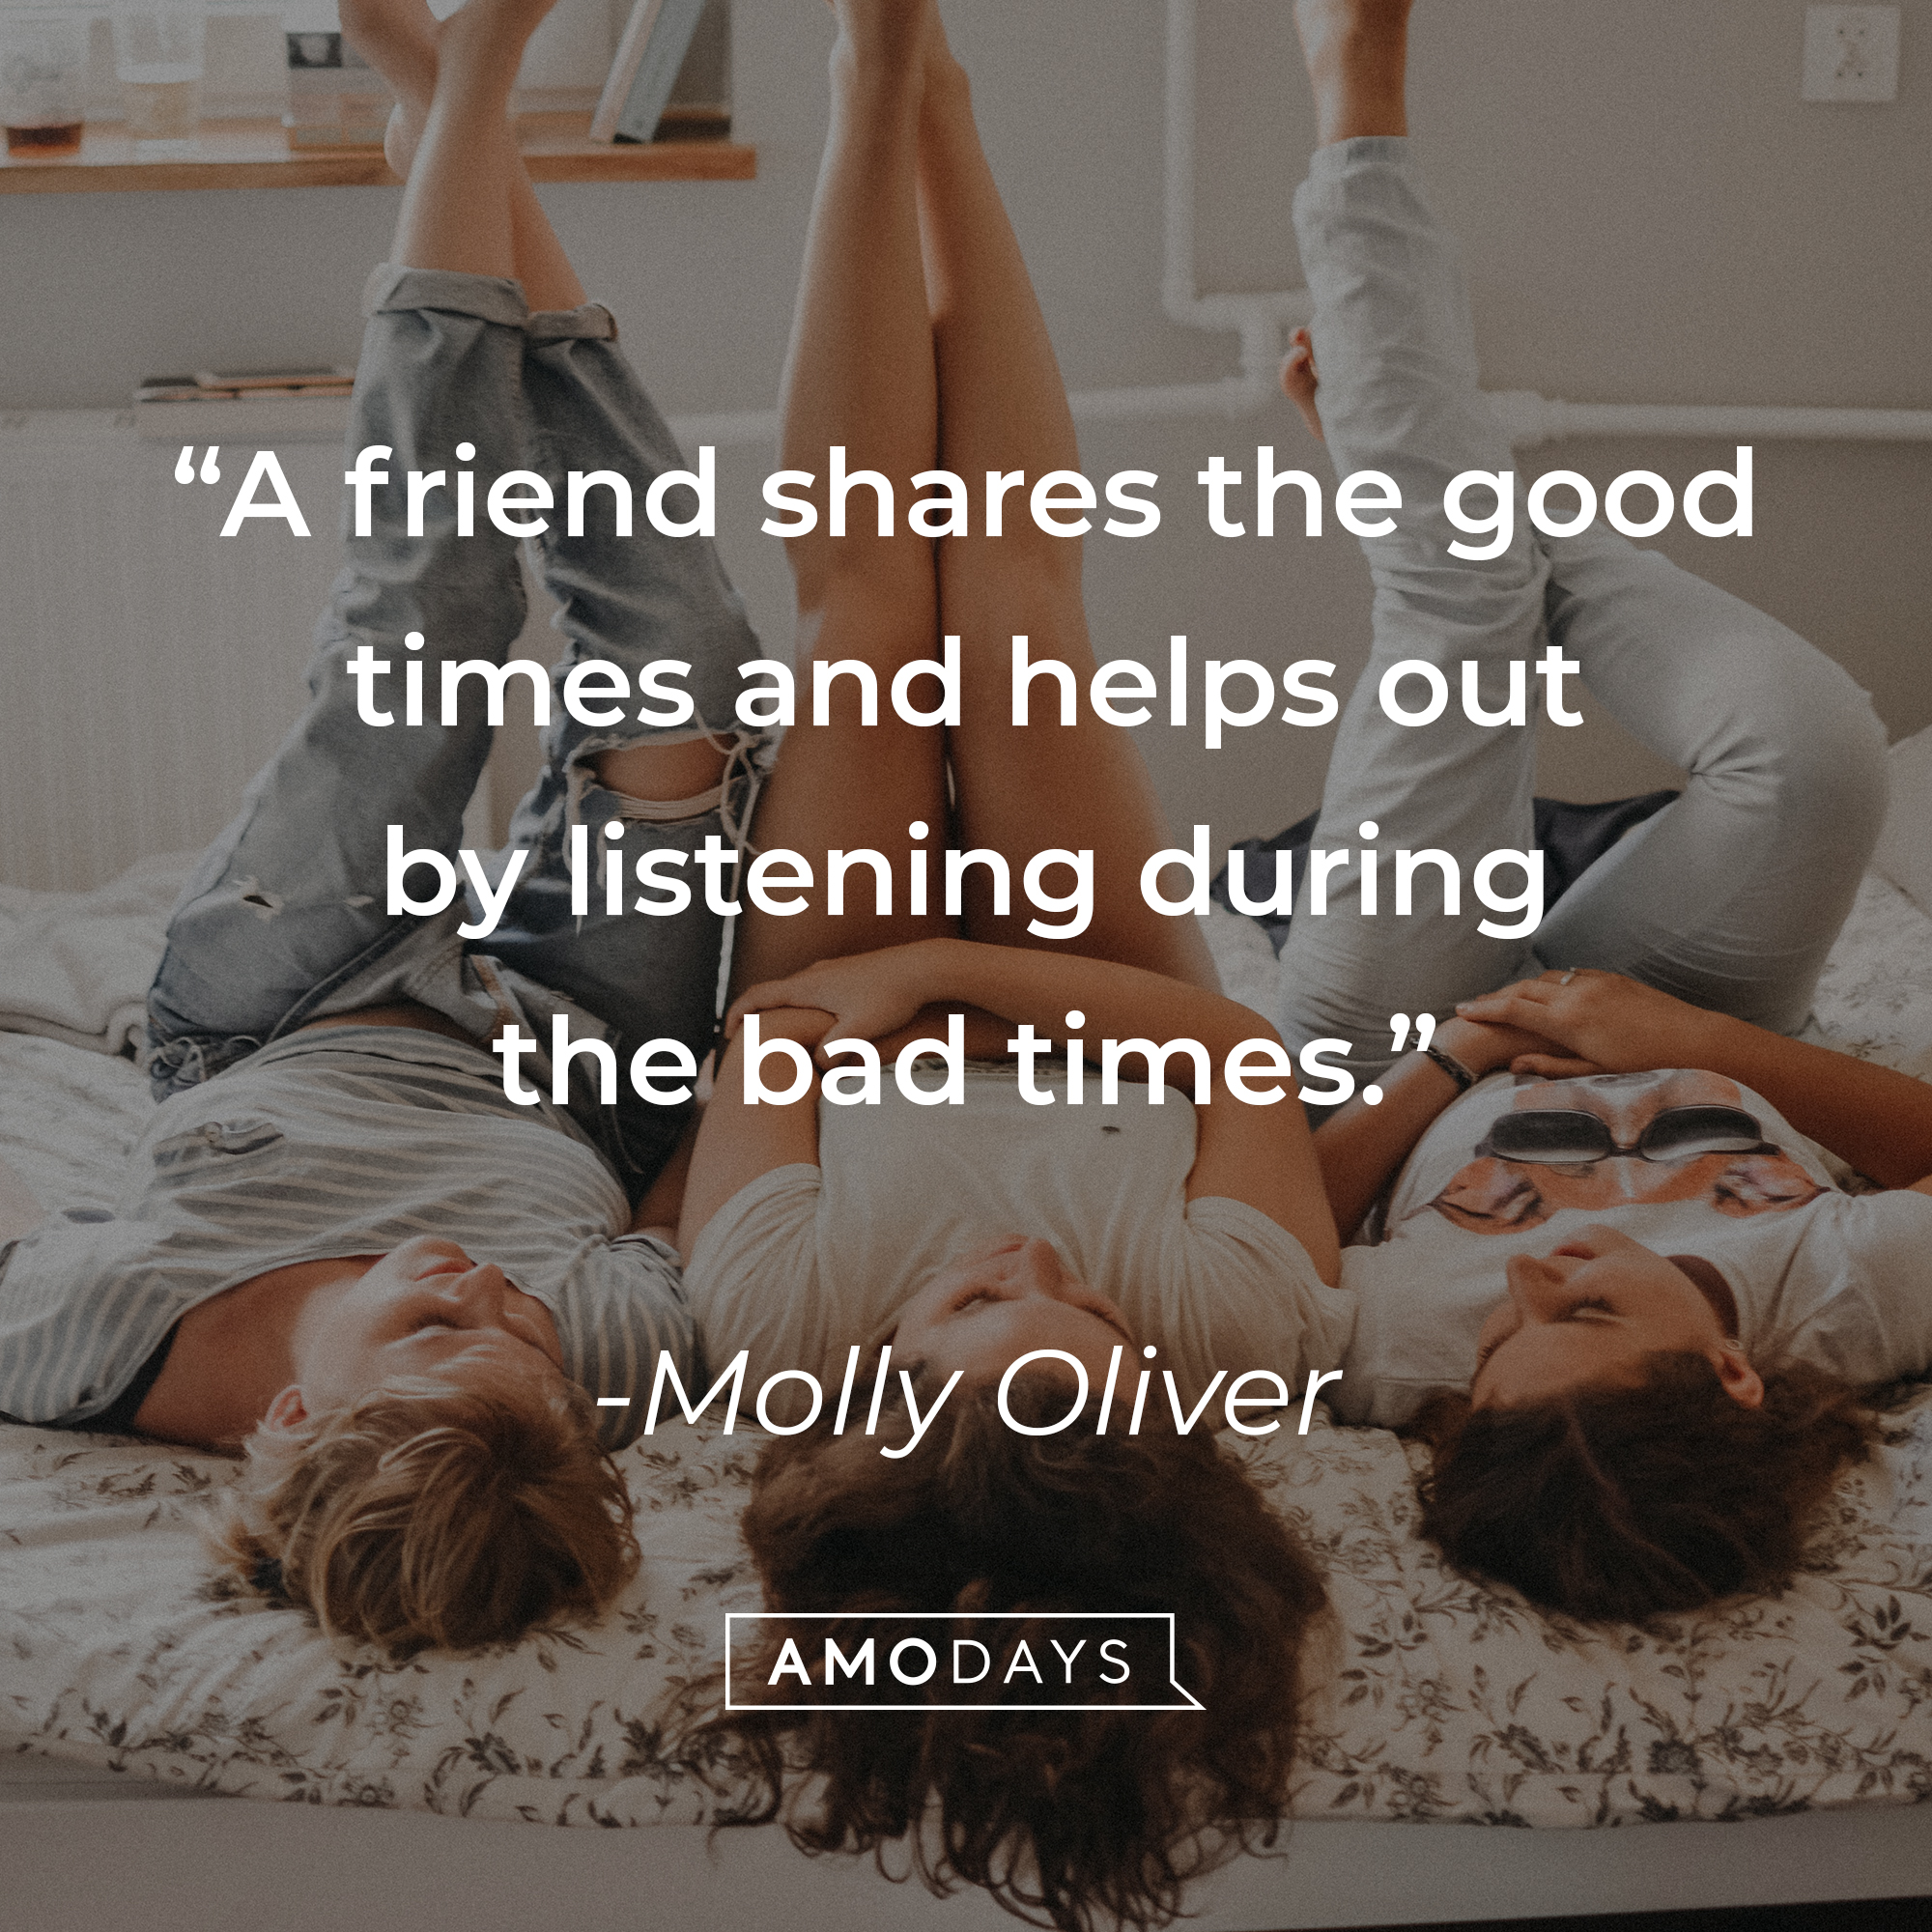 Molly Oliver's quote:  "A friend shares the good times and helps out by listening during the bad times." | Source: Unsplash